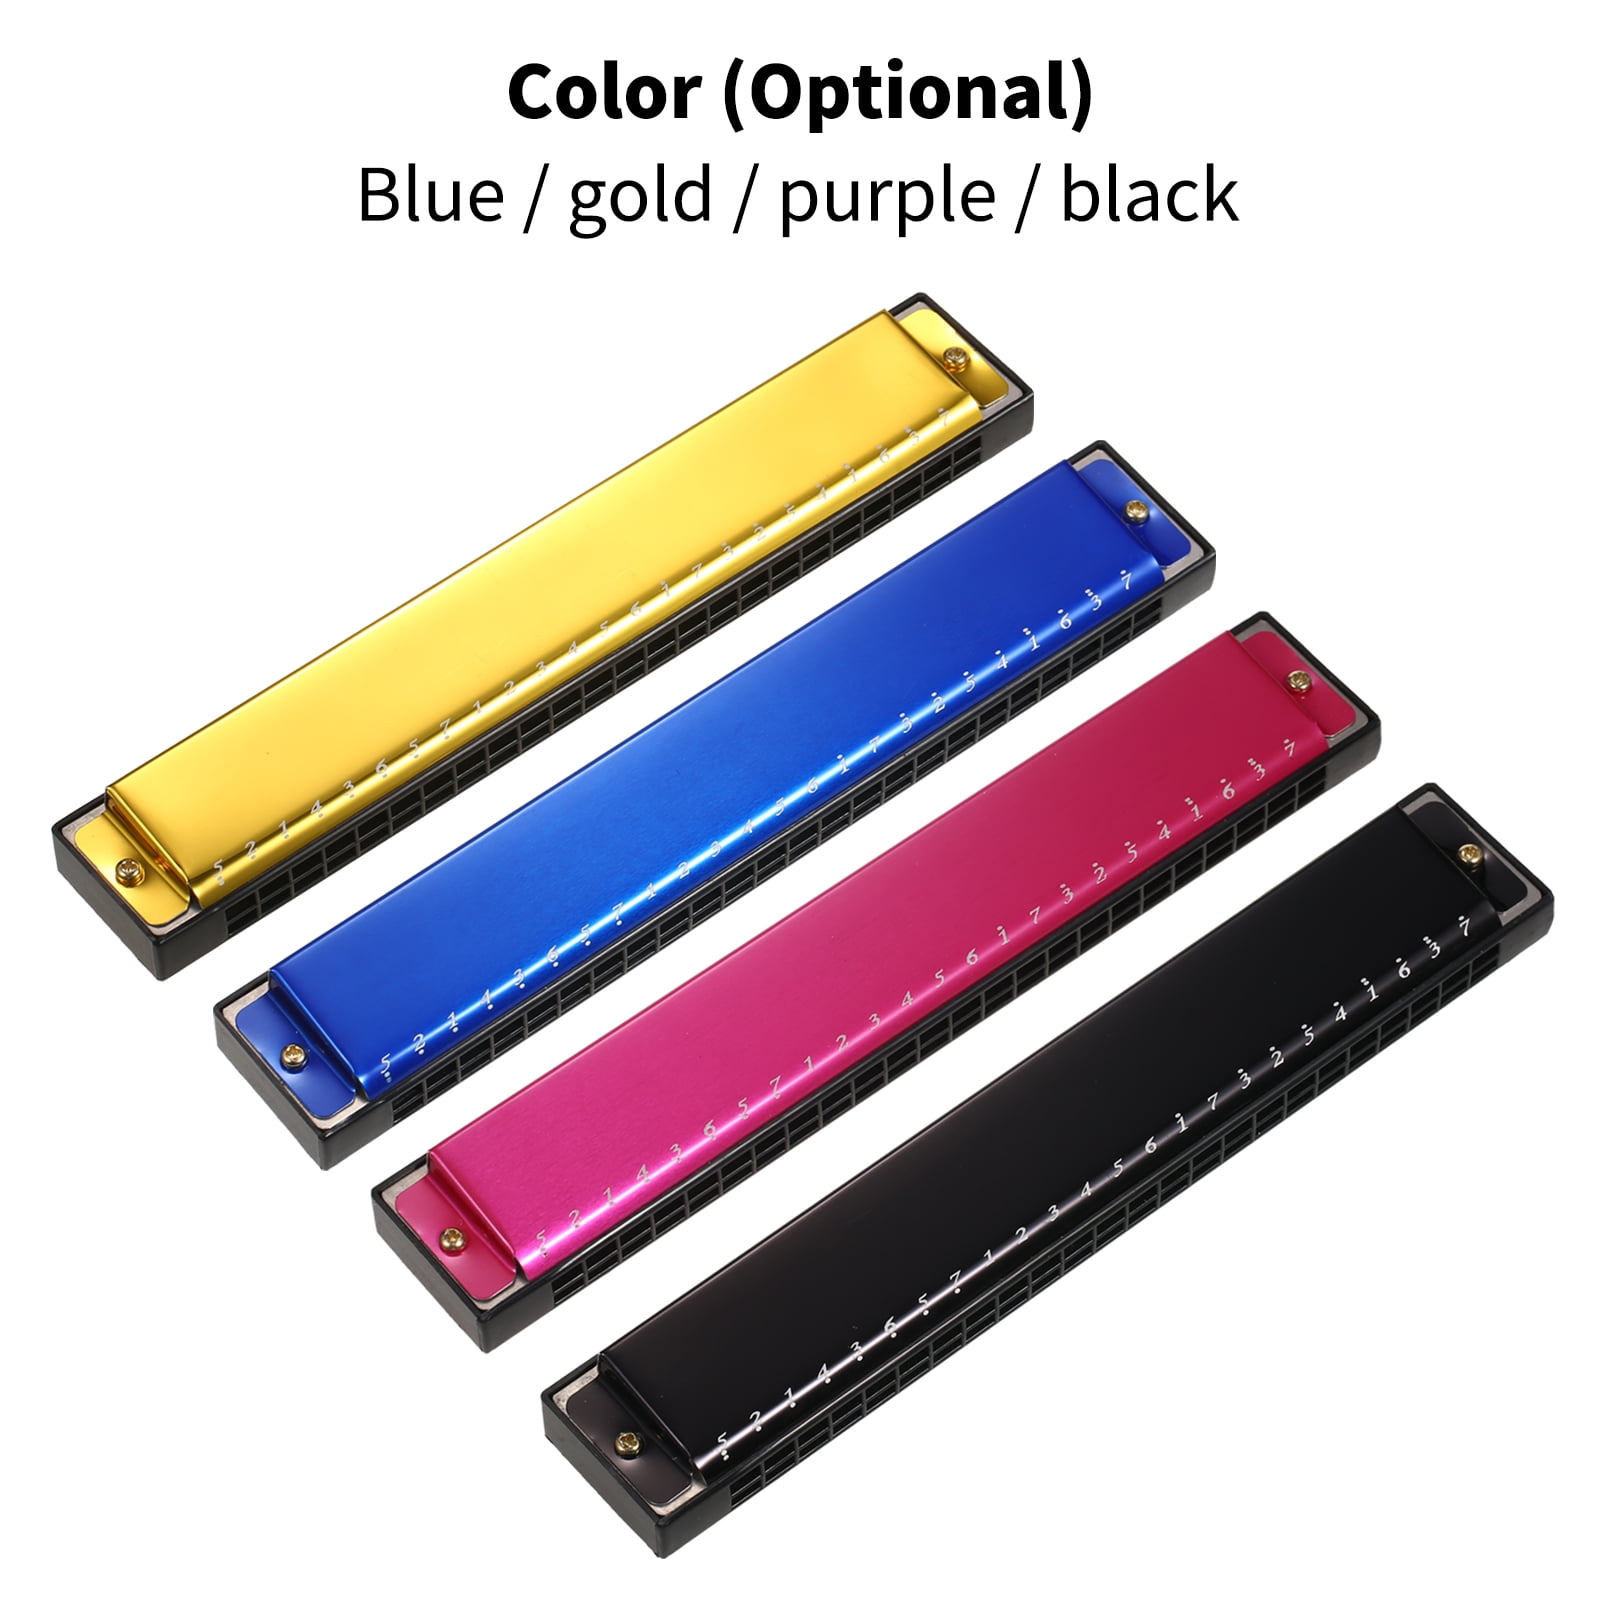 Japan TOMBO Harmonica 6624 High Level Play For Beginner Adult Children  Polyphonic C Tune 24 Hole Harmonica From Musical0club, $65.33